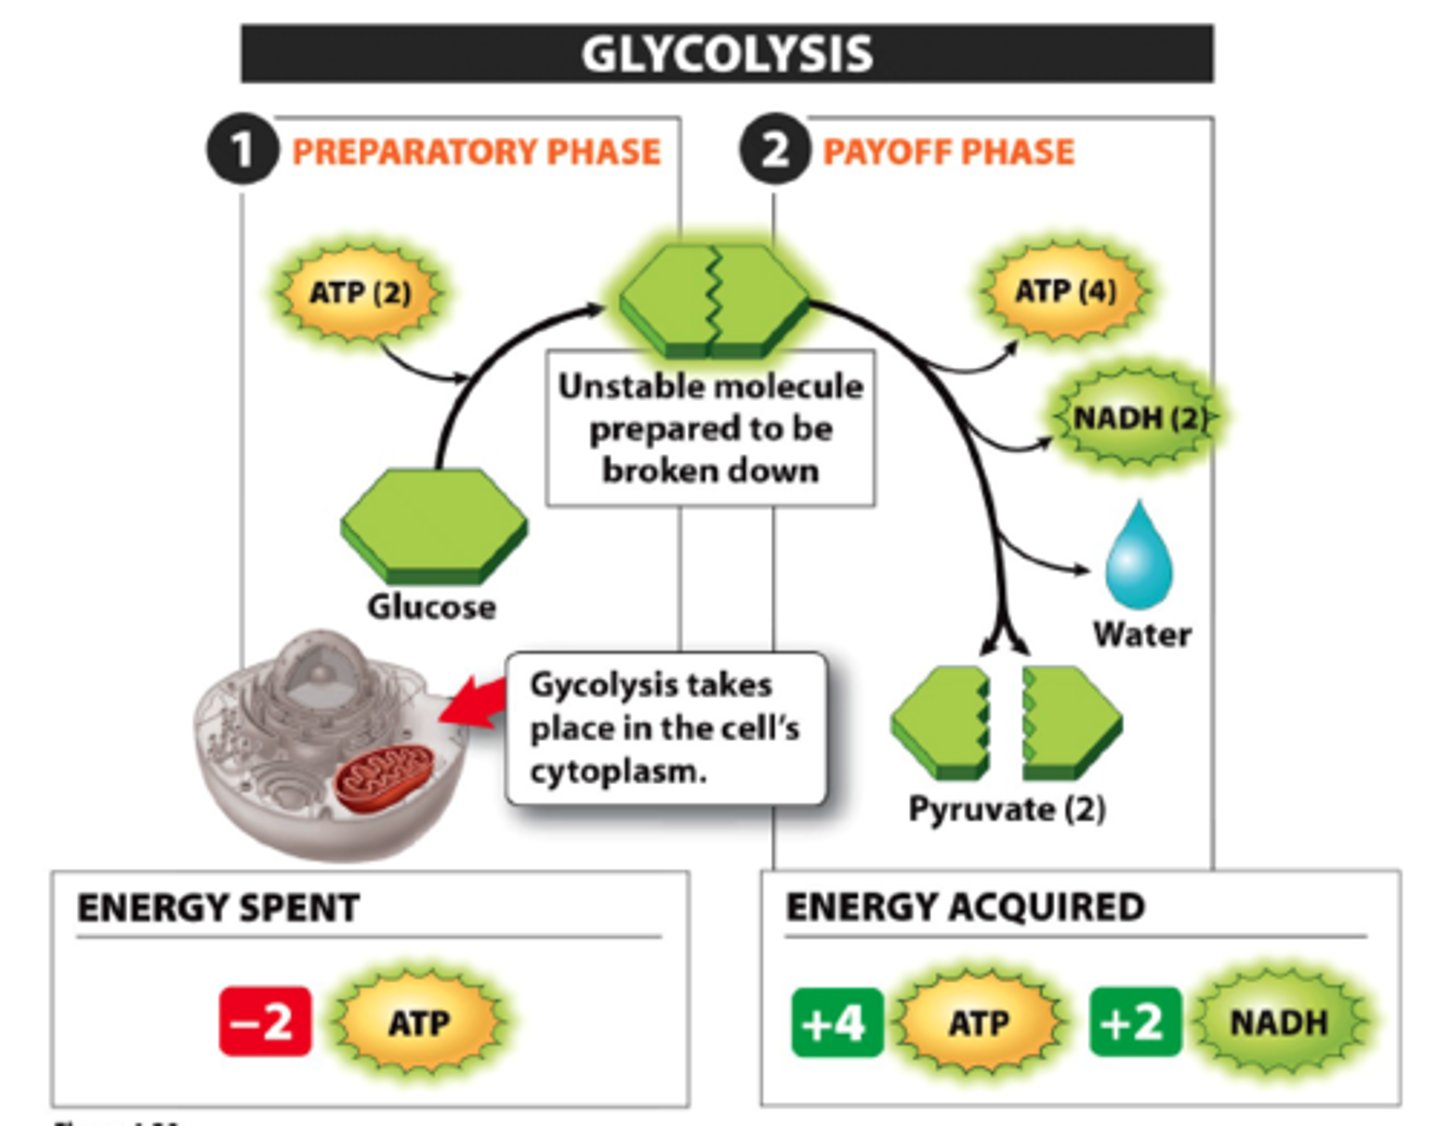 <p>endergonic stage of glycolysis in which glucose is converted into G3P</p>